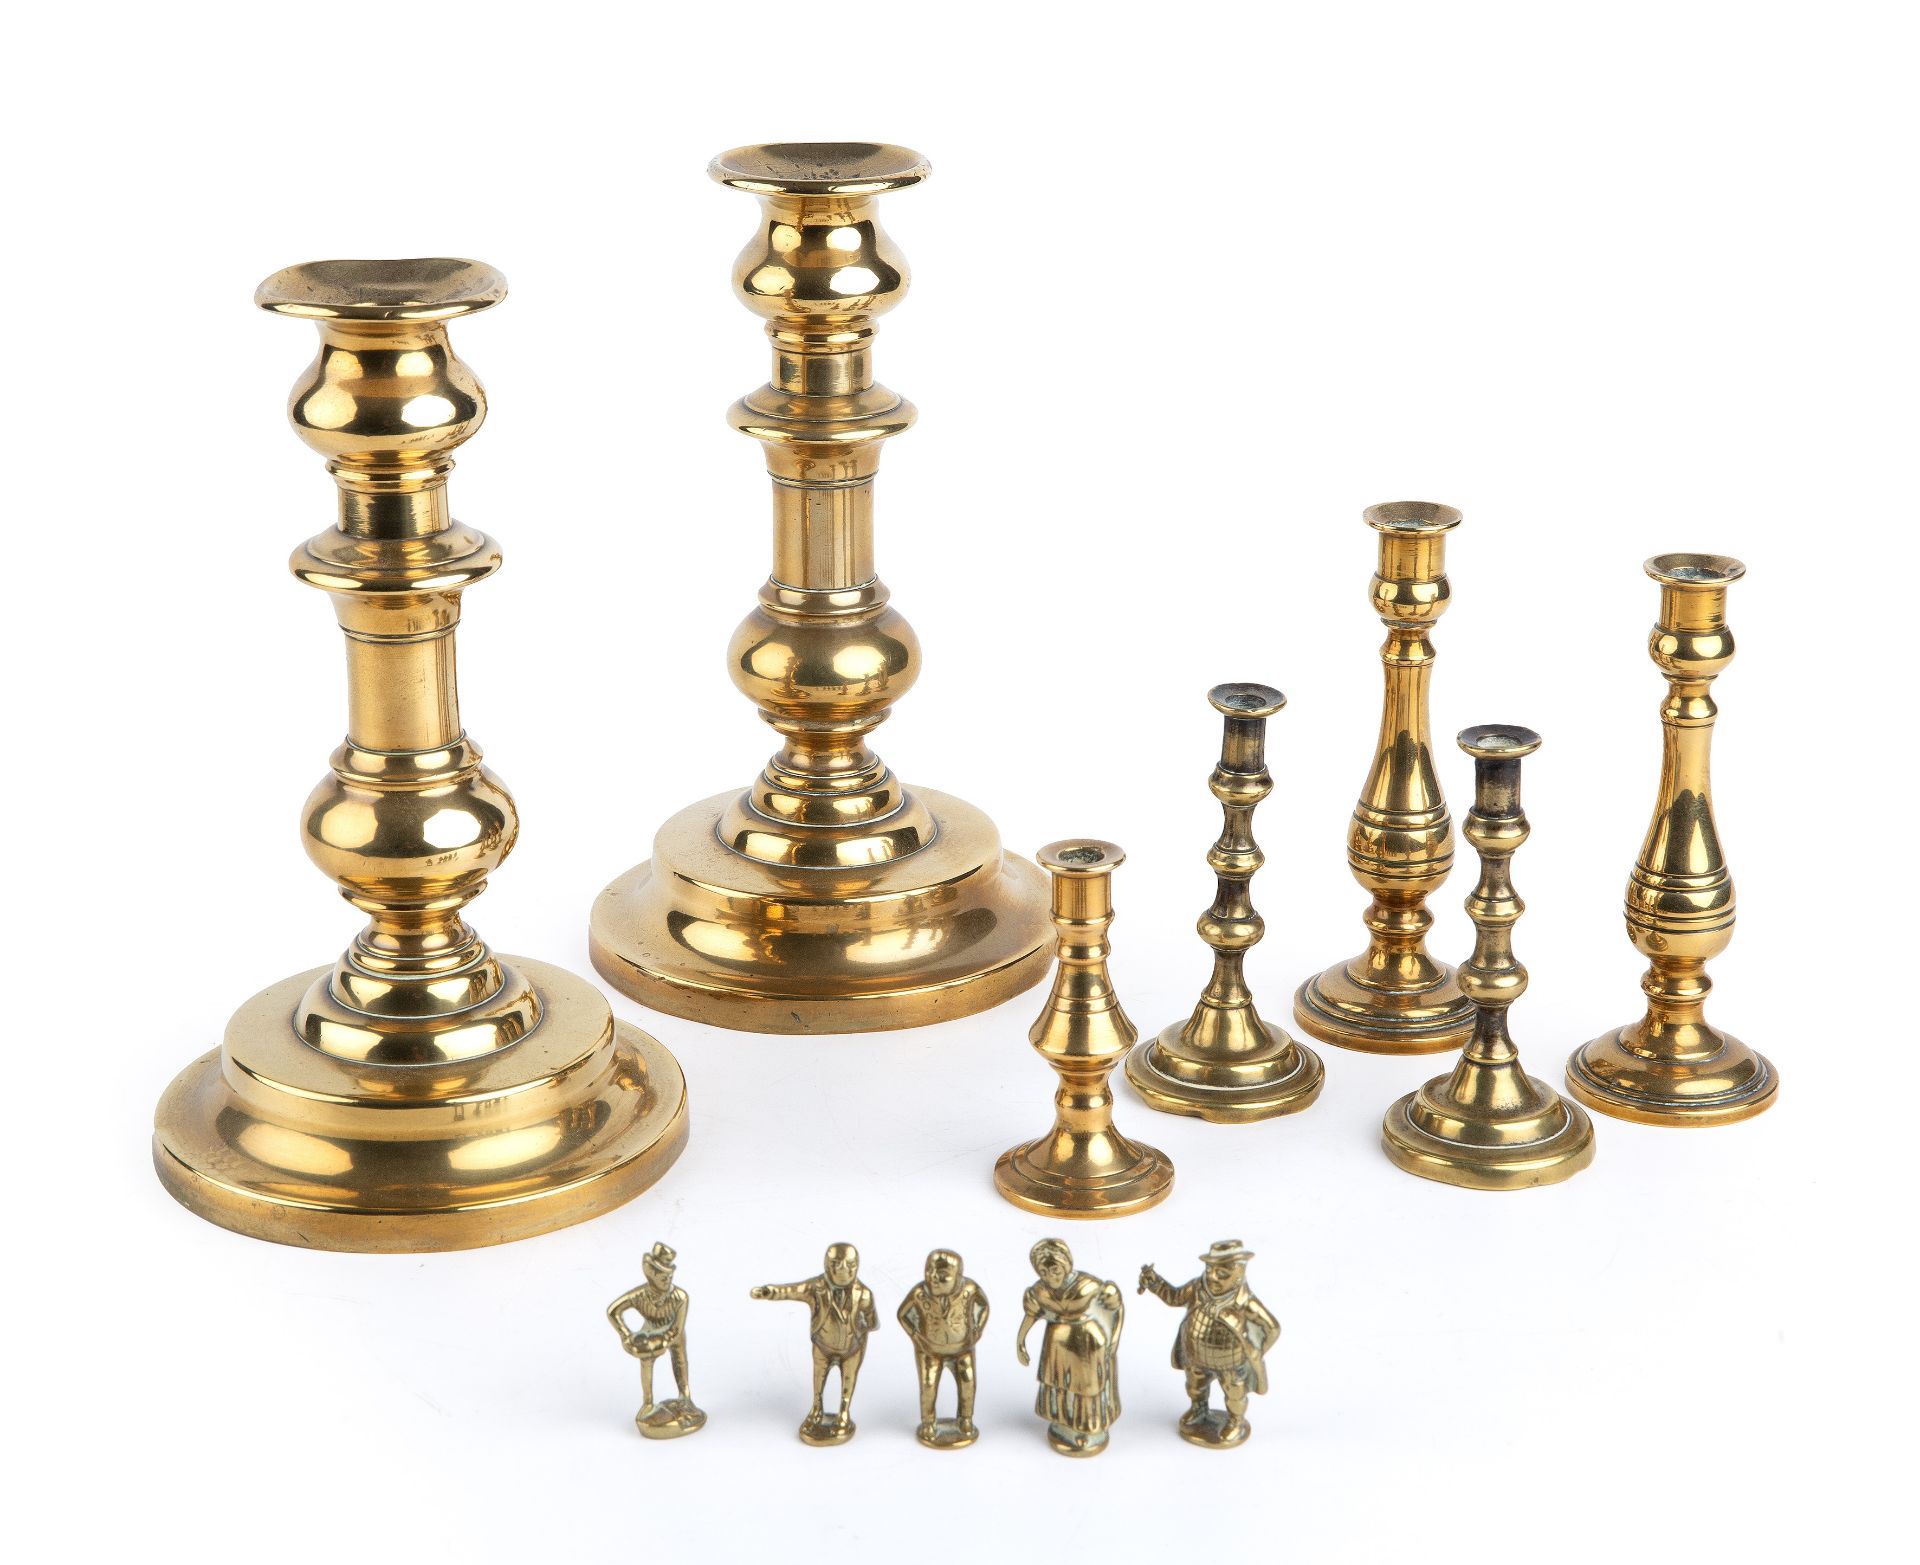 19th century brassware to include candlesticks, tapersticks and small Dickens figures